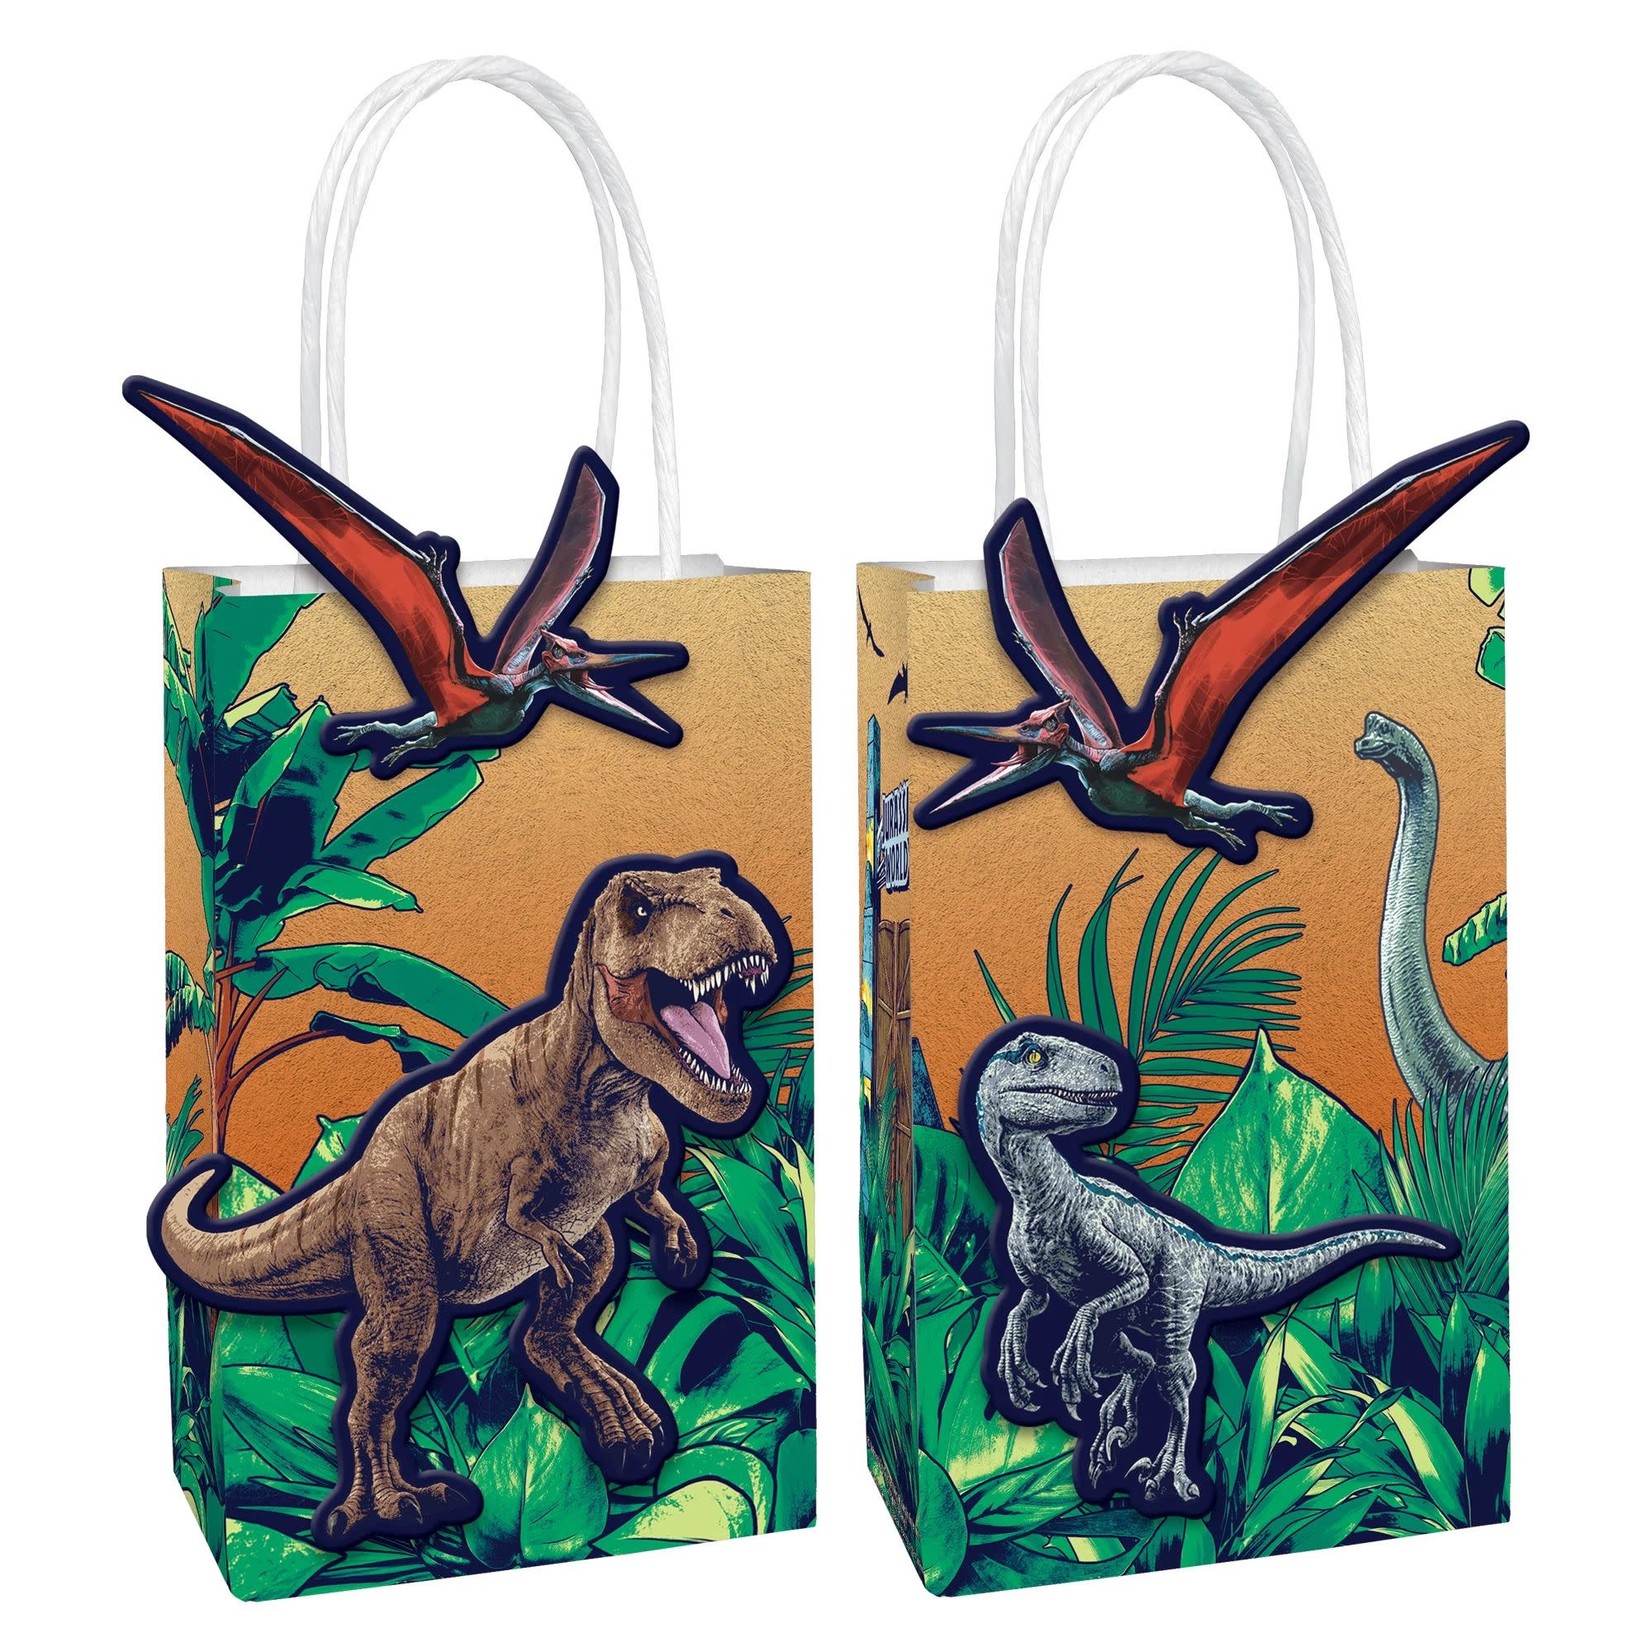 Jurassic World Into the Wild Create Your Own Bags